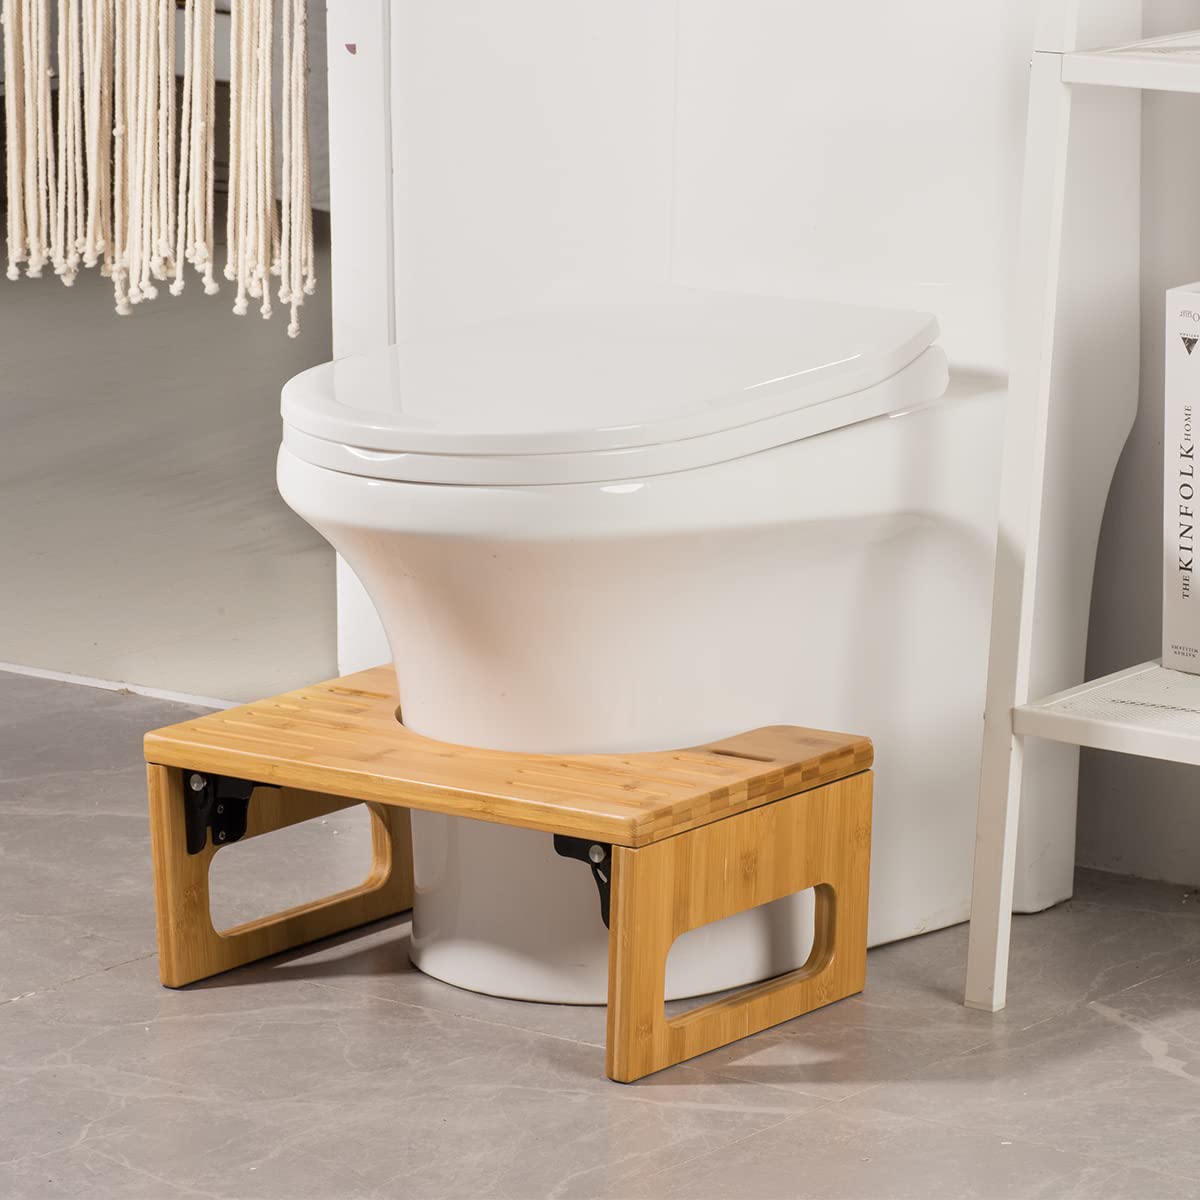 AmazerBath 7 Inches Bamboo Toilet Stool for Bathroom, Collapsible Poop Stool, Natural Color